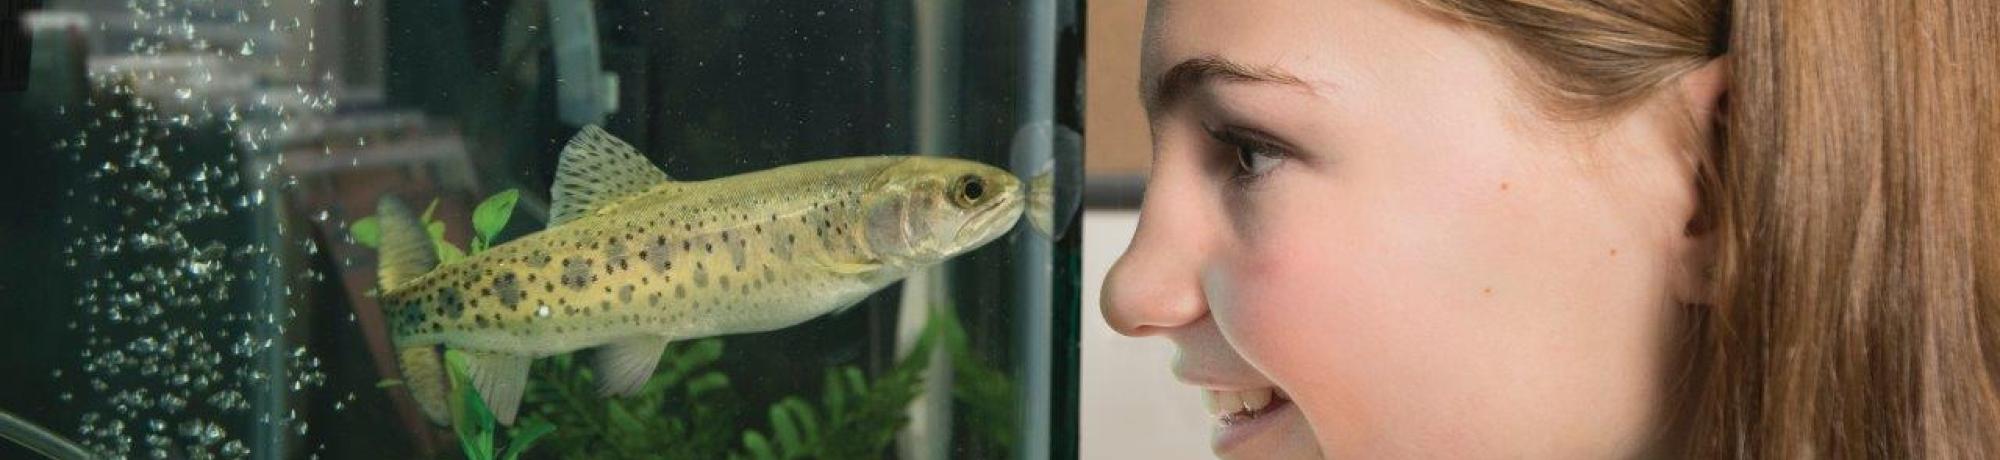 A student looks at a Lahontan Cutthroat Trout in a tank in the Science Center.